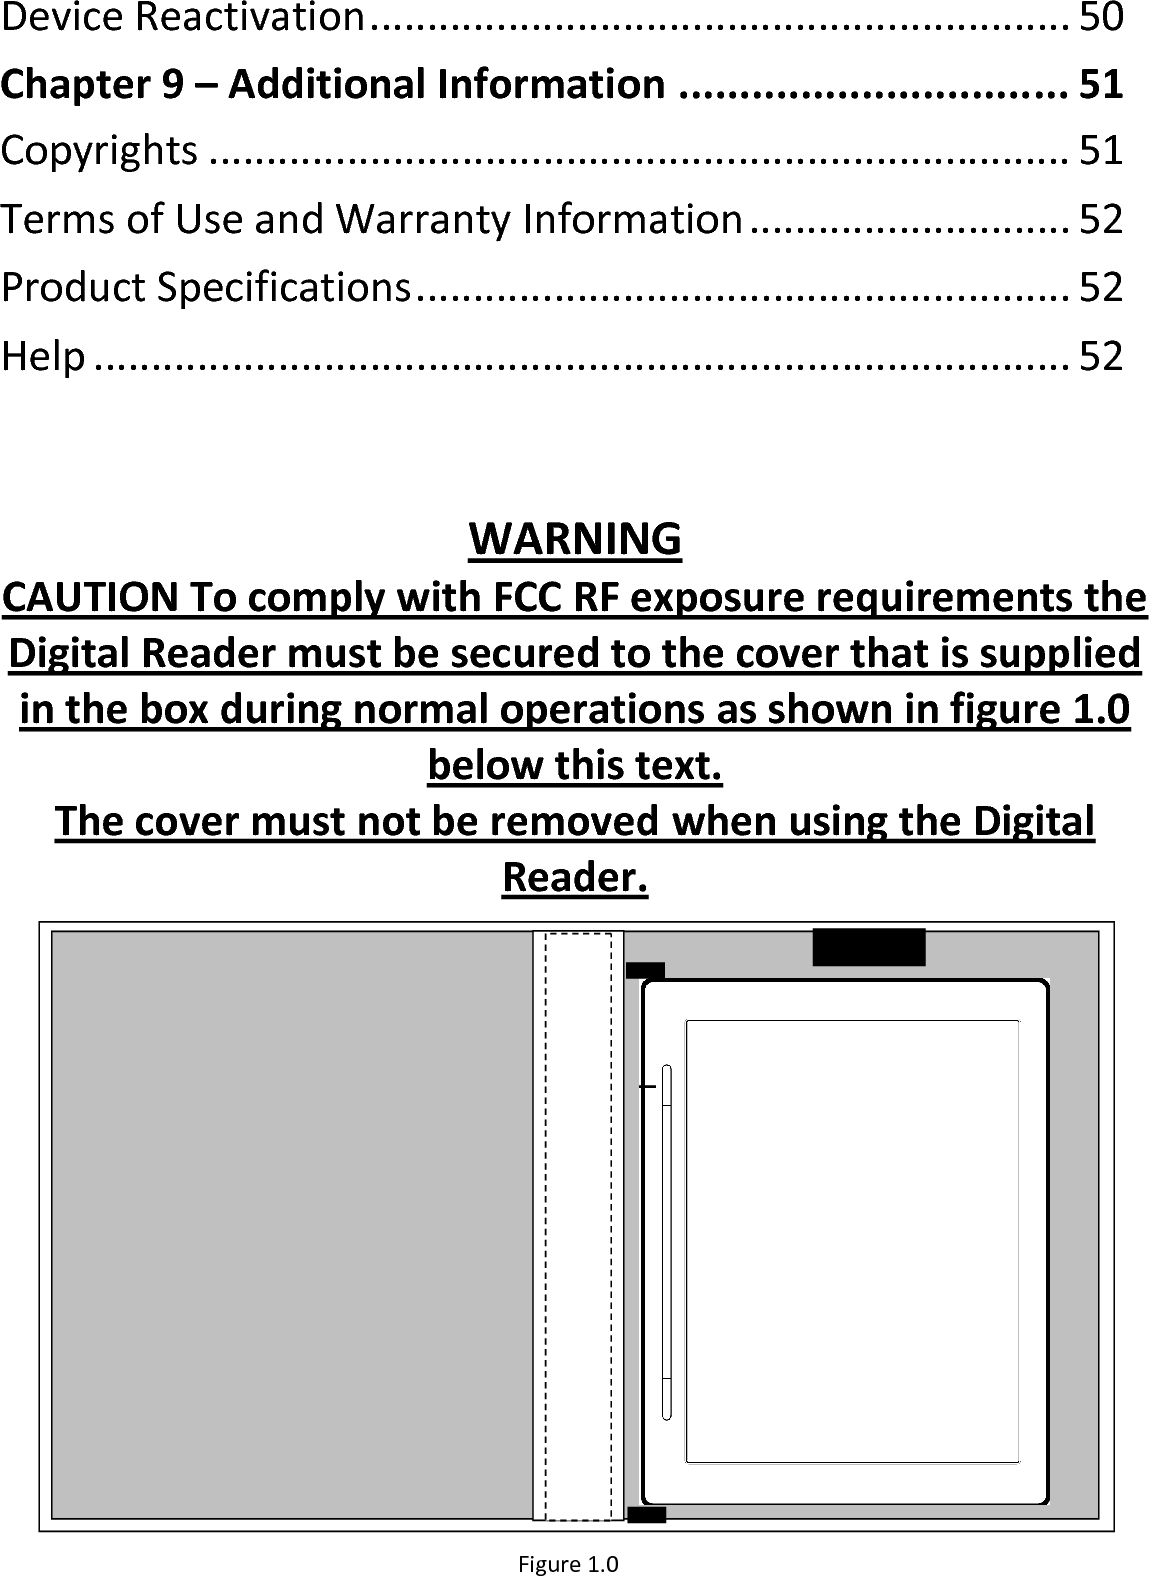 Device Reactivation............................................................. 50Chapter 9 – Additional Information ................................ 51Copyrights ........................................................................... 51Terms of Use and Warranty Information............................ 52Product Specifications......................................................... 52Help ..................................................................................... 52WARNINGCAUTION To comply with FCC RF exposure requirements the Digital Reader must be secured to the cover that is supplied in the box during normal operations as shown in figure 1.0below this text.The cover must not be removed when using the Digital Reader.Figure 1.0